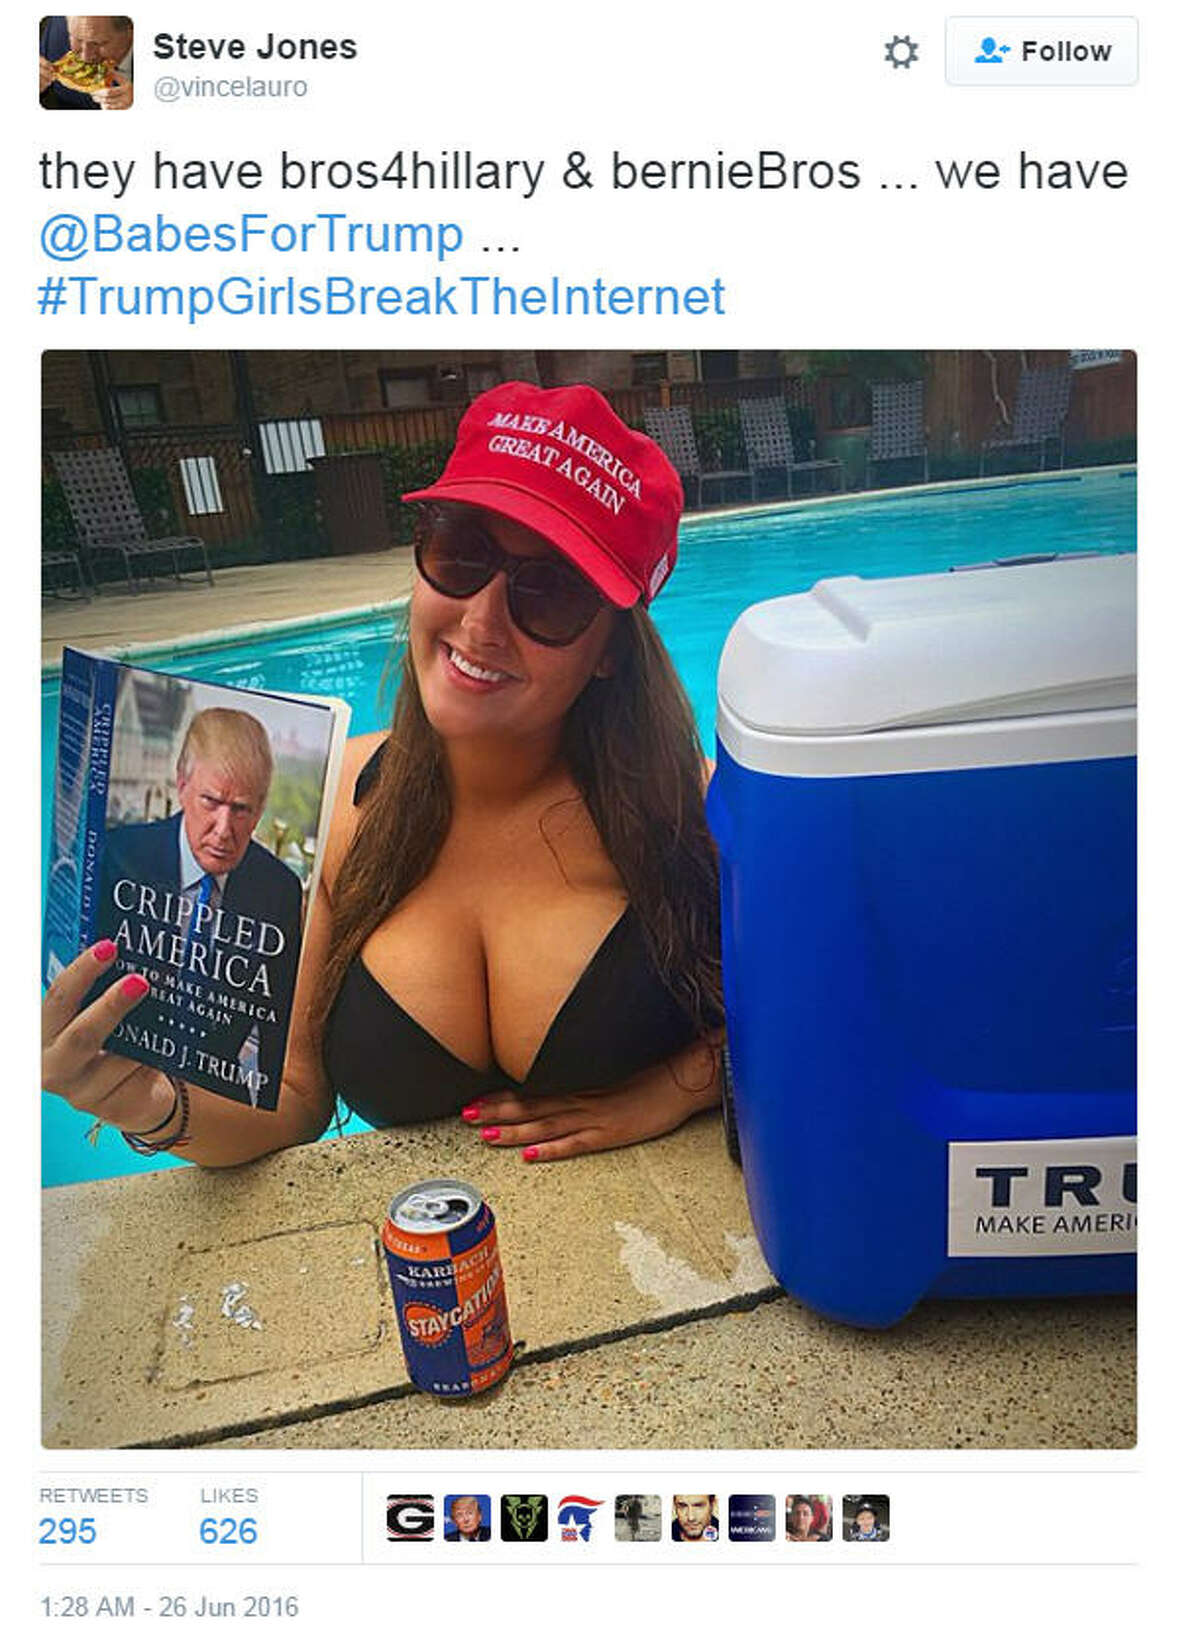 The hashtag #TrumpGirlsBreakTheInternet left social media flooded Sunday afternoon with photos of women showing support for Donald Trump.